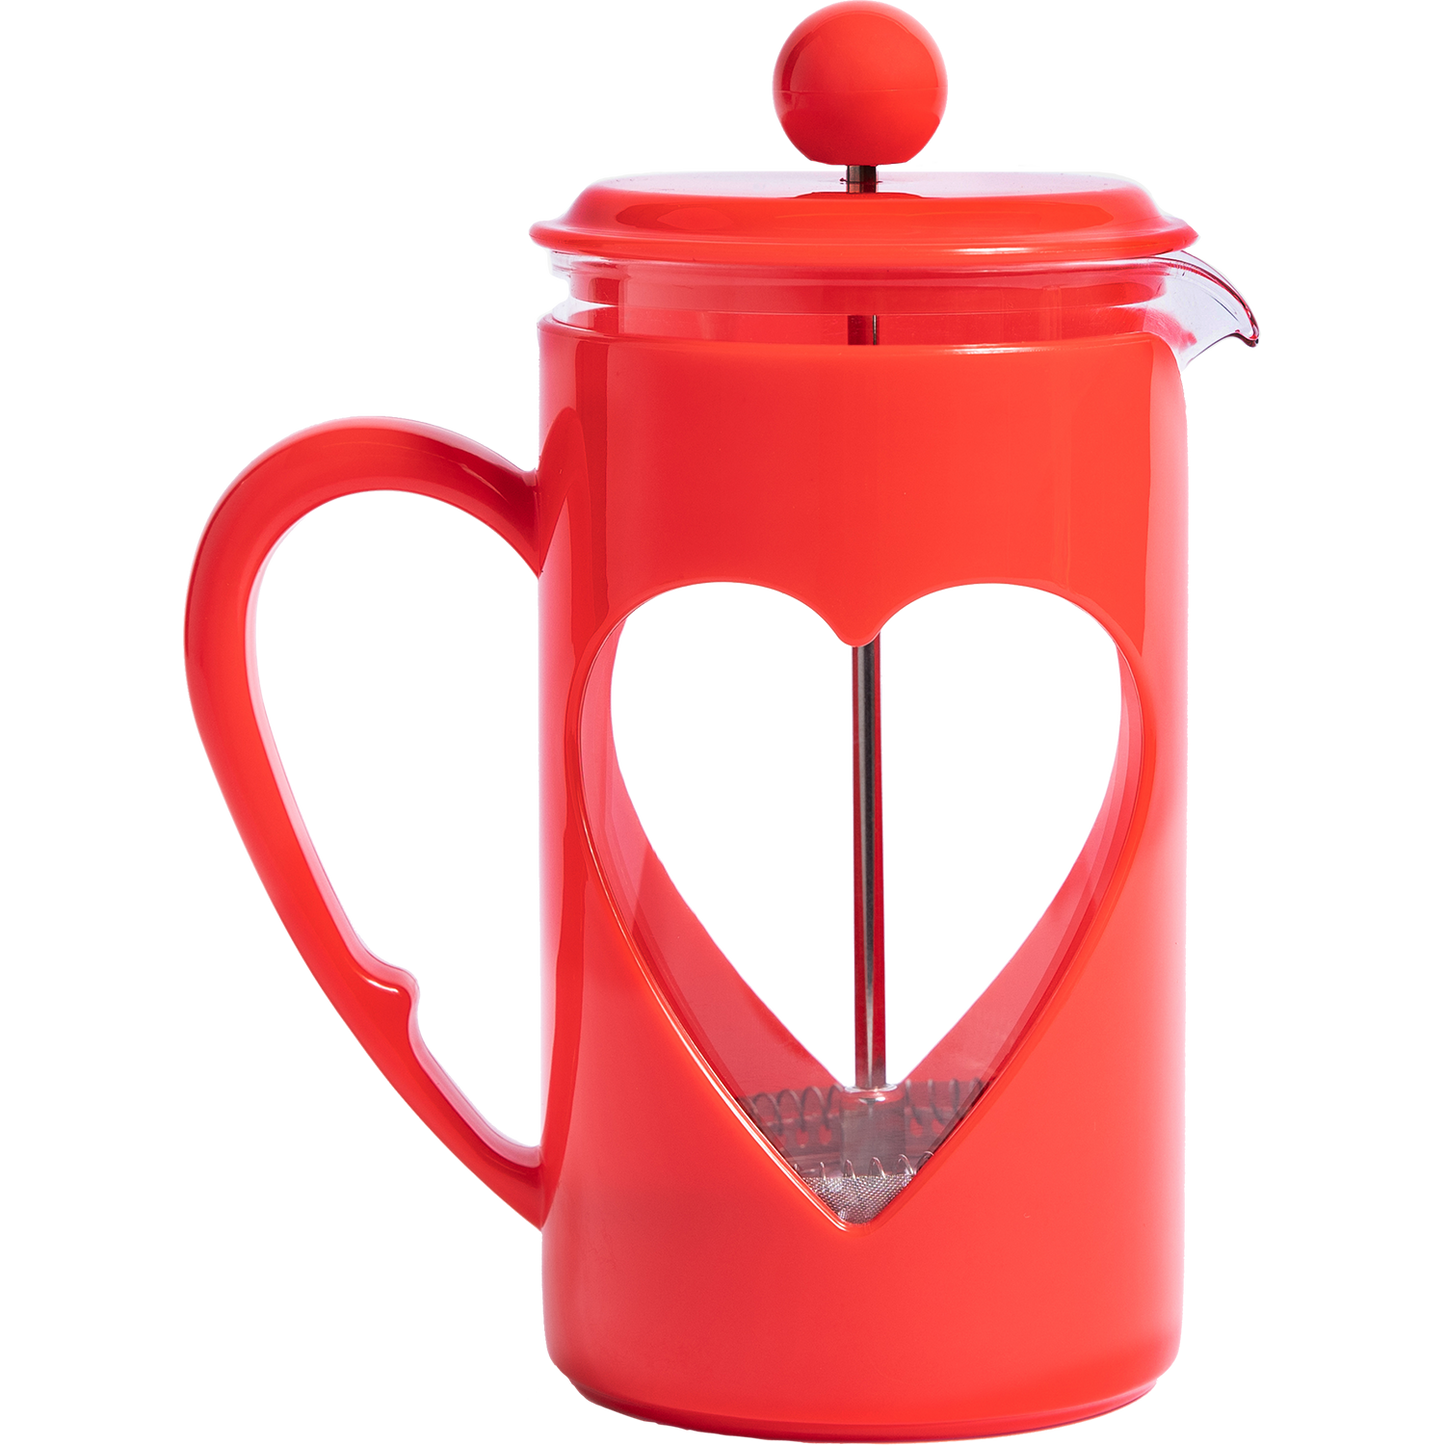 The Lover's French Press